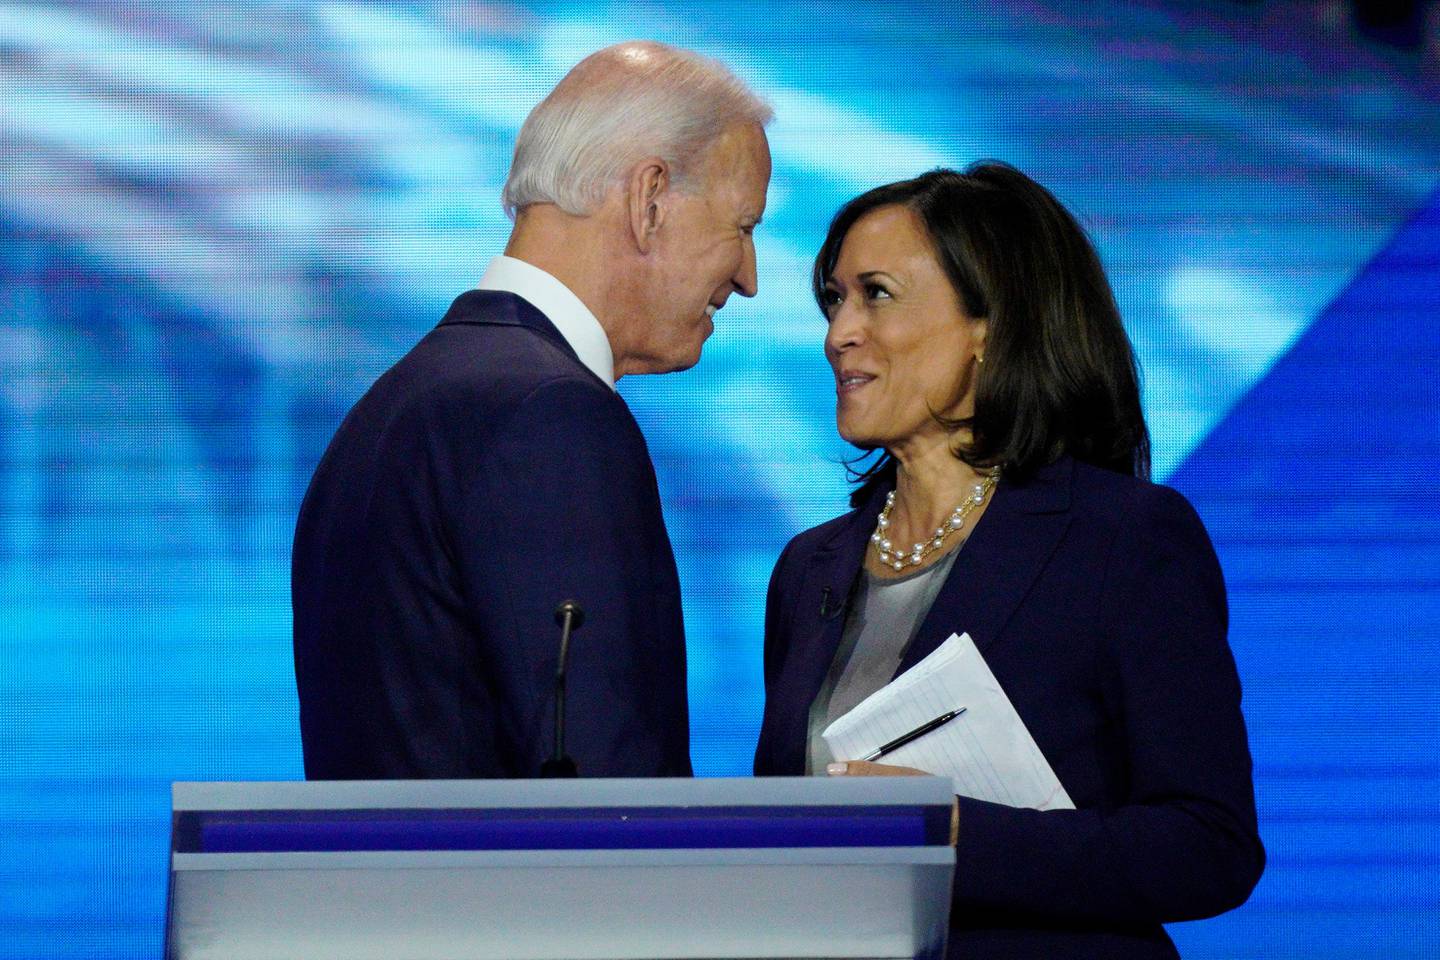 FILE - In this Sept. 12, 2019, file photo, Democratic presidential candidate former Vice President Joe Biden, left, and then-candidate Sen. Kamala Harris, D-Calif. shake hands after a Democratic presidential primary debate hosted by ABC at Texas Southern University in Houston. Biden has chosen Harris as his running mate. (AP Photo/David J. Phillip, File)